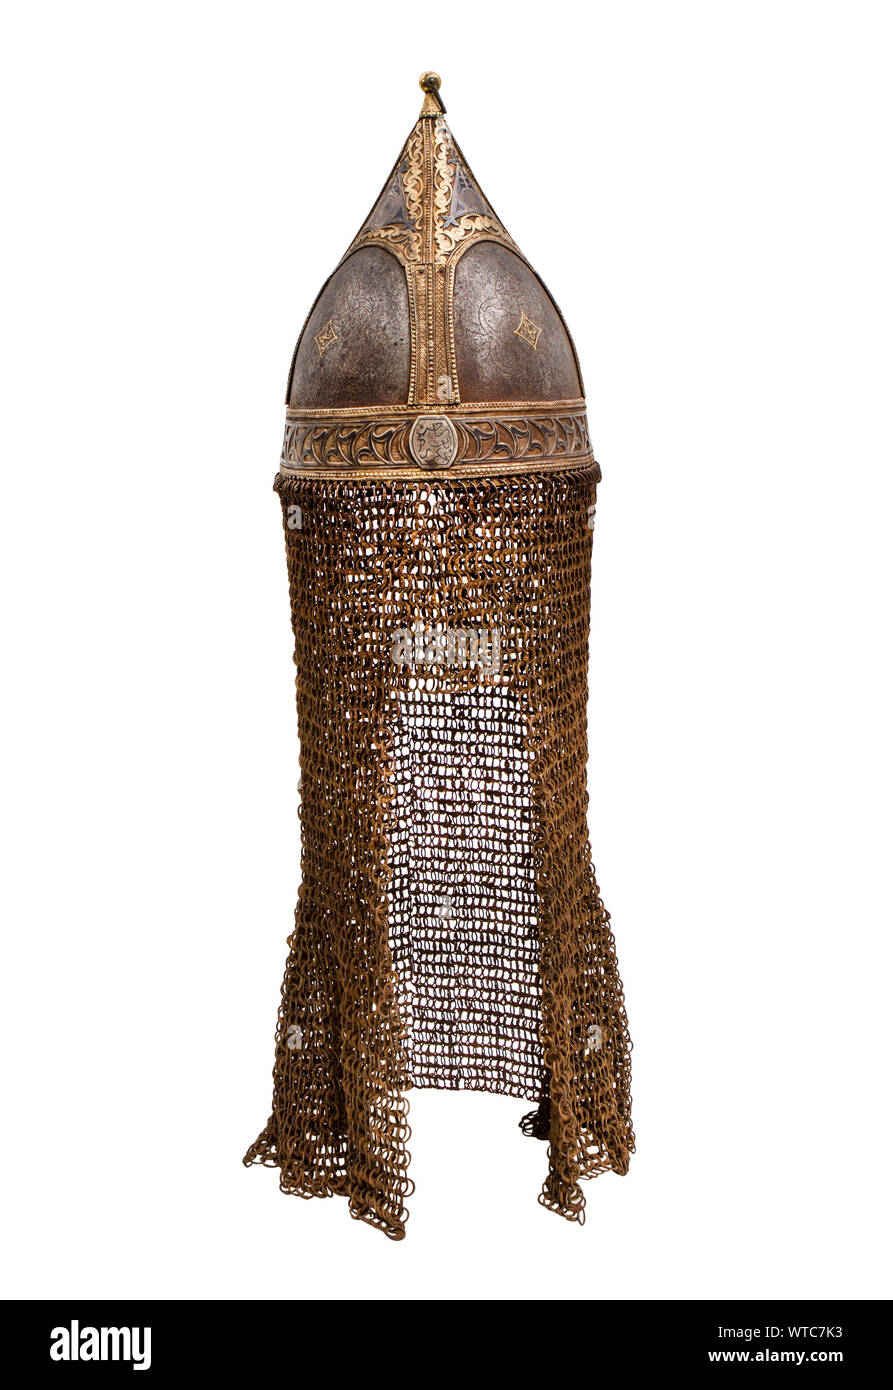 Circassian helmet of conical form with nielloed silver decorative plates and chain mail. The helmet shape is similar to the Turkish Chichak. Stock Photo